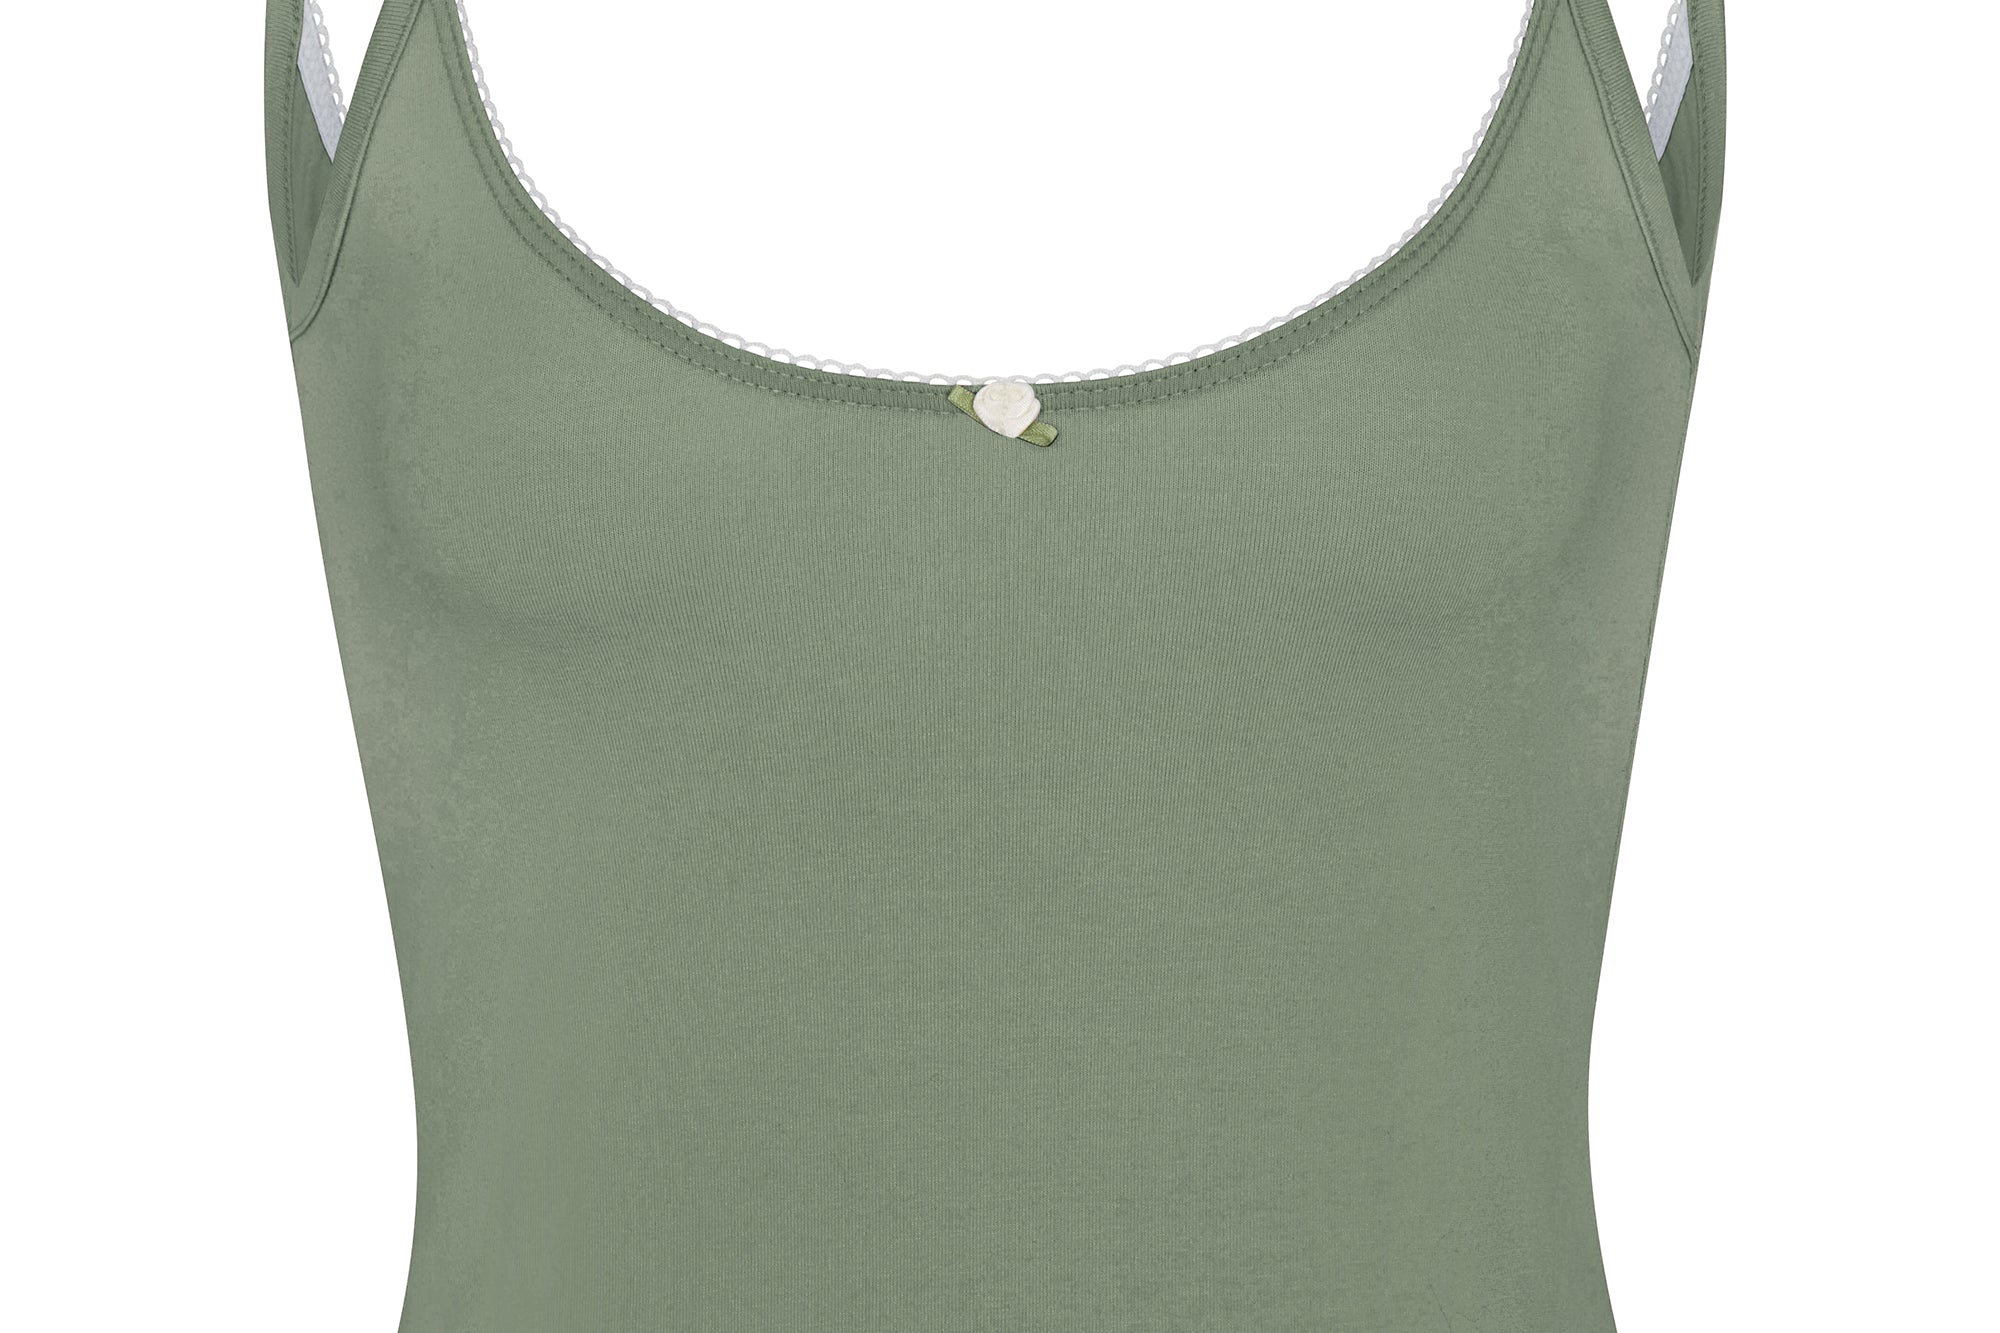 KIWI RATA Women's Cami with Built-in Bra Adjustable Strap, Summer Sleeveless  Shirt Casual Tank Top Camisole Padded Tanks for Yoga Beige S at   Women's Clothing store